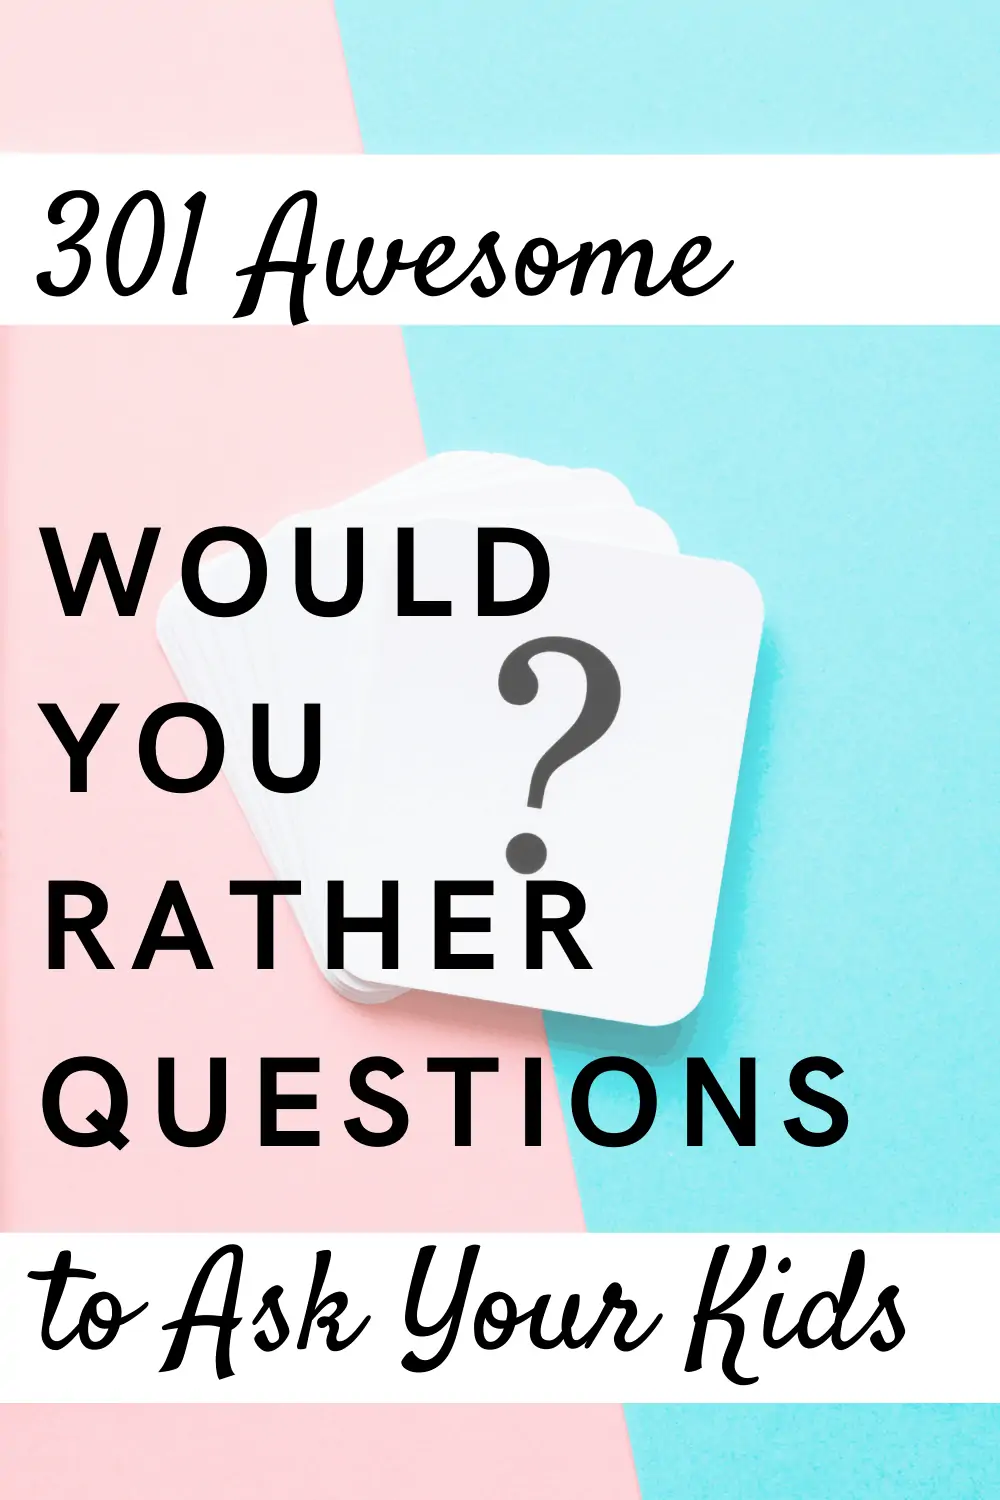 The Ultimate List of 301 Amazing Would You Rather Questions for Kids